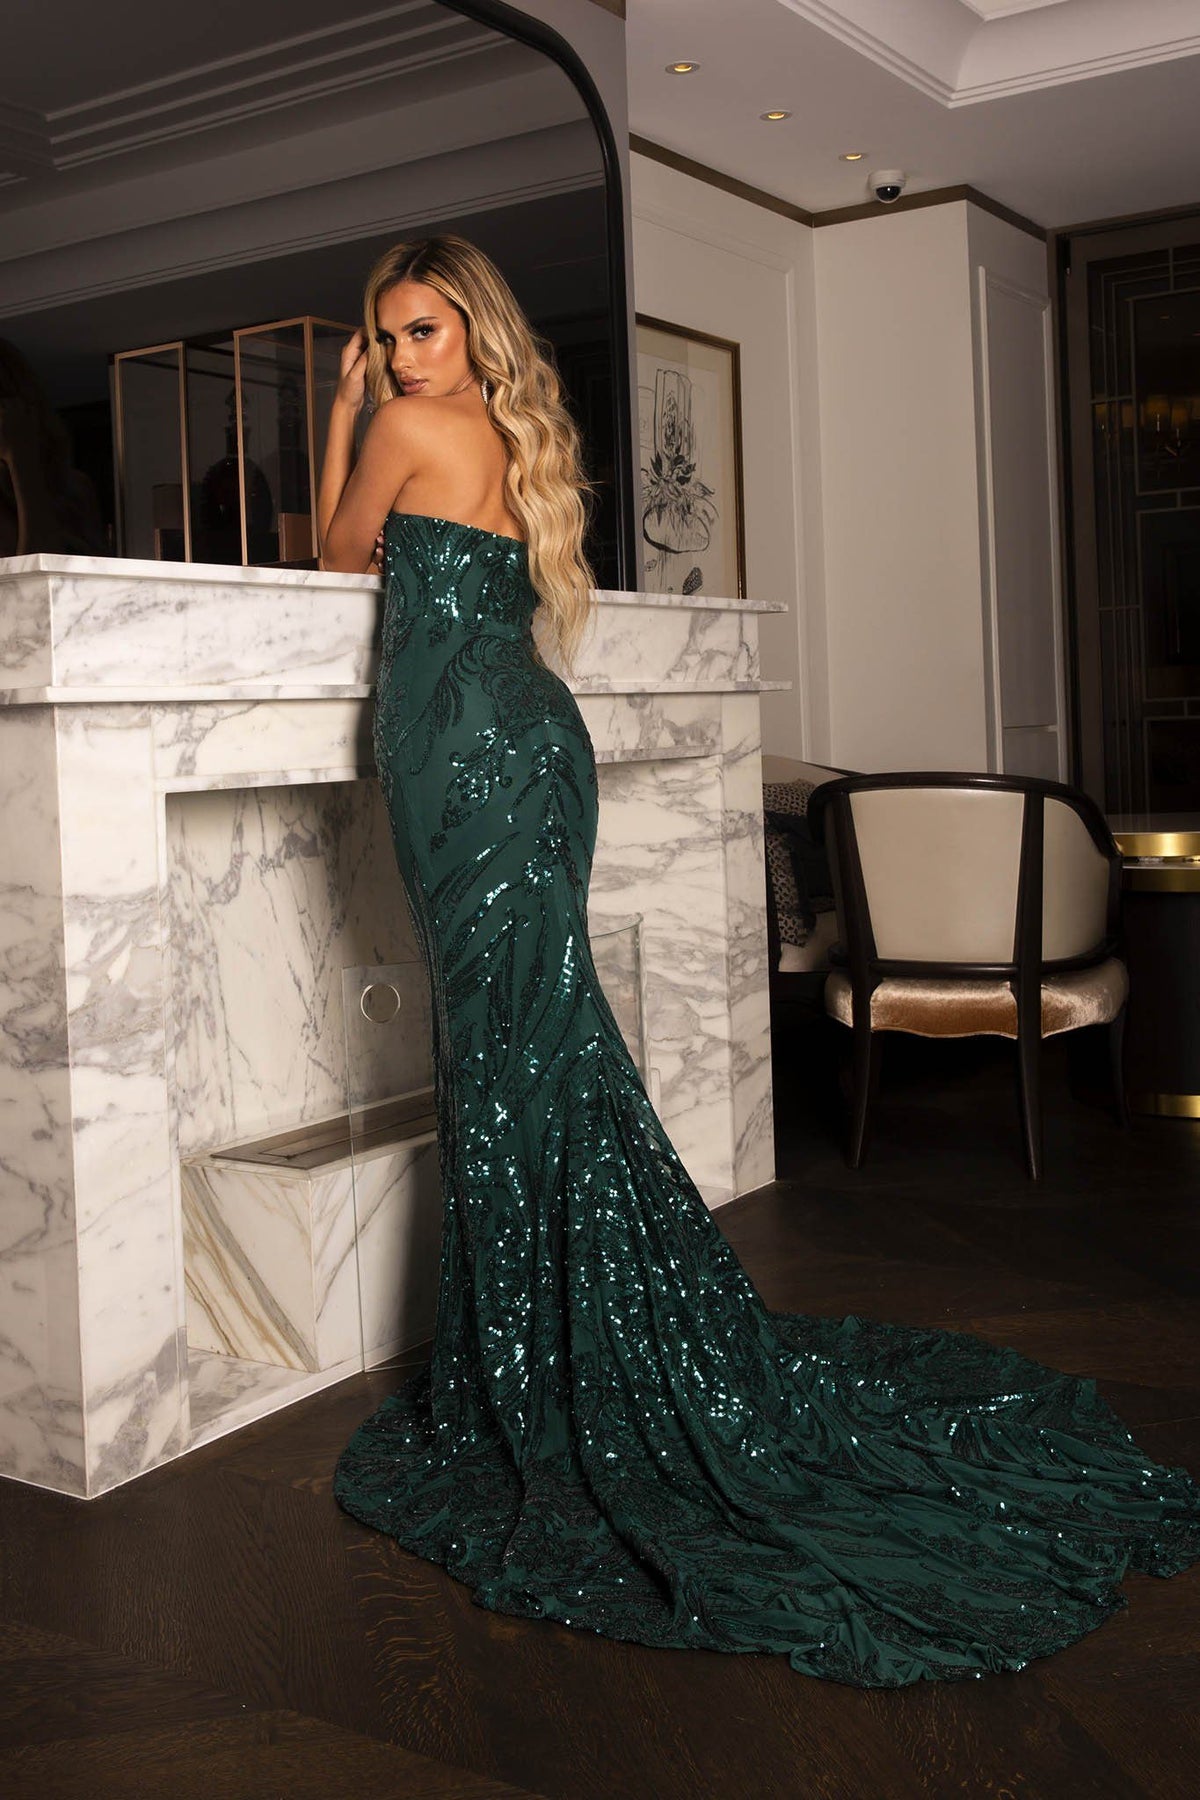 Back Image showing Long Floor Sweeping Train of Emerald Green Embroidered Pattern Sequin with Deep Green Lining Floor Length Evening Dress with Strapless Sweetheart Neckline and Mermaid Skirt